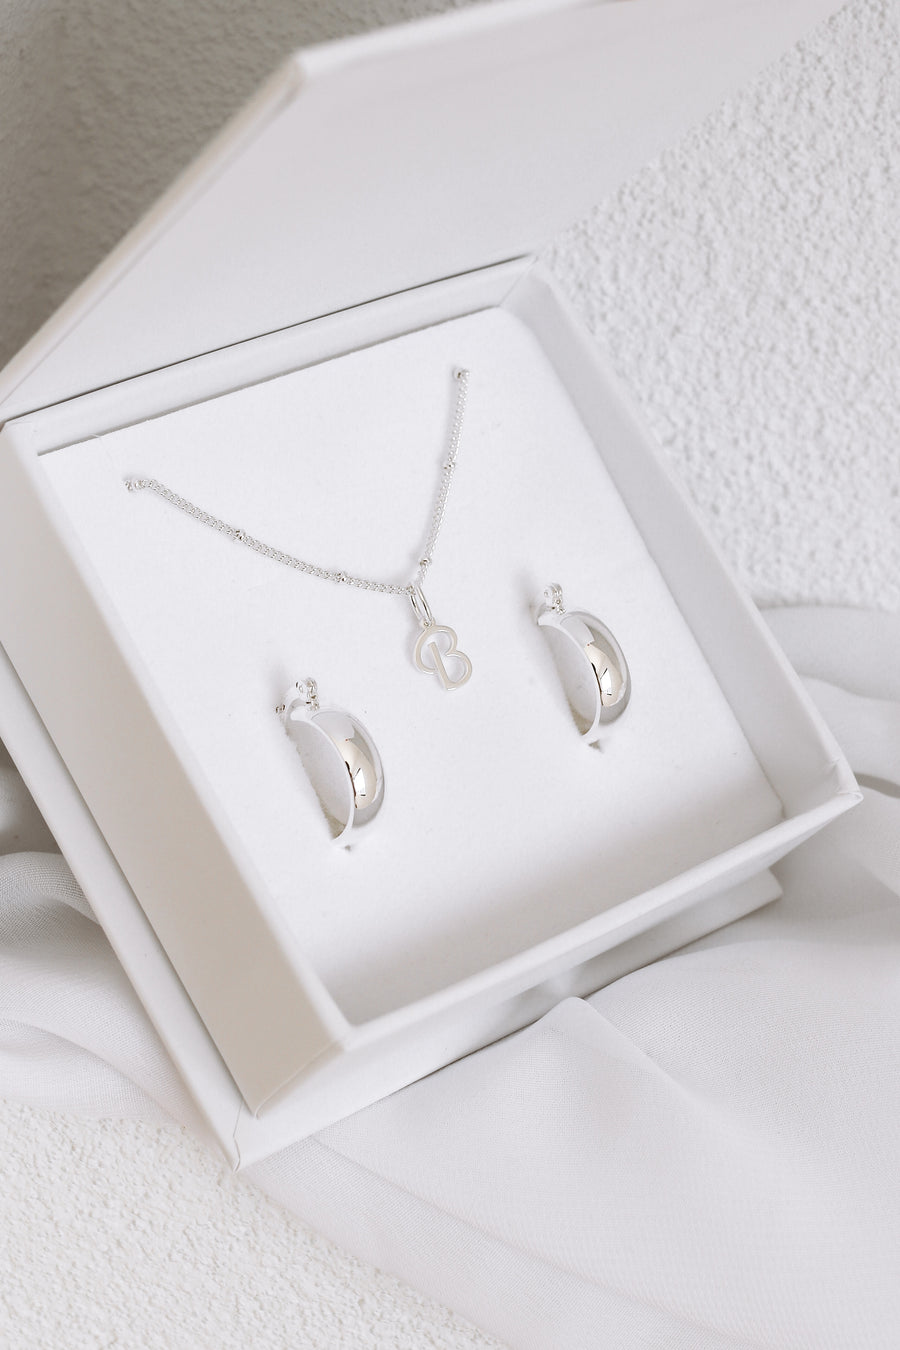 Sarah Bundle - Stainless Steel Letter Necklace & Earrings